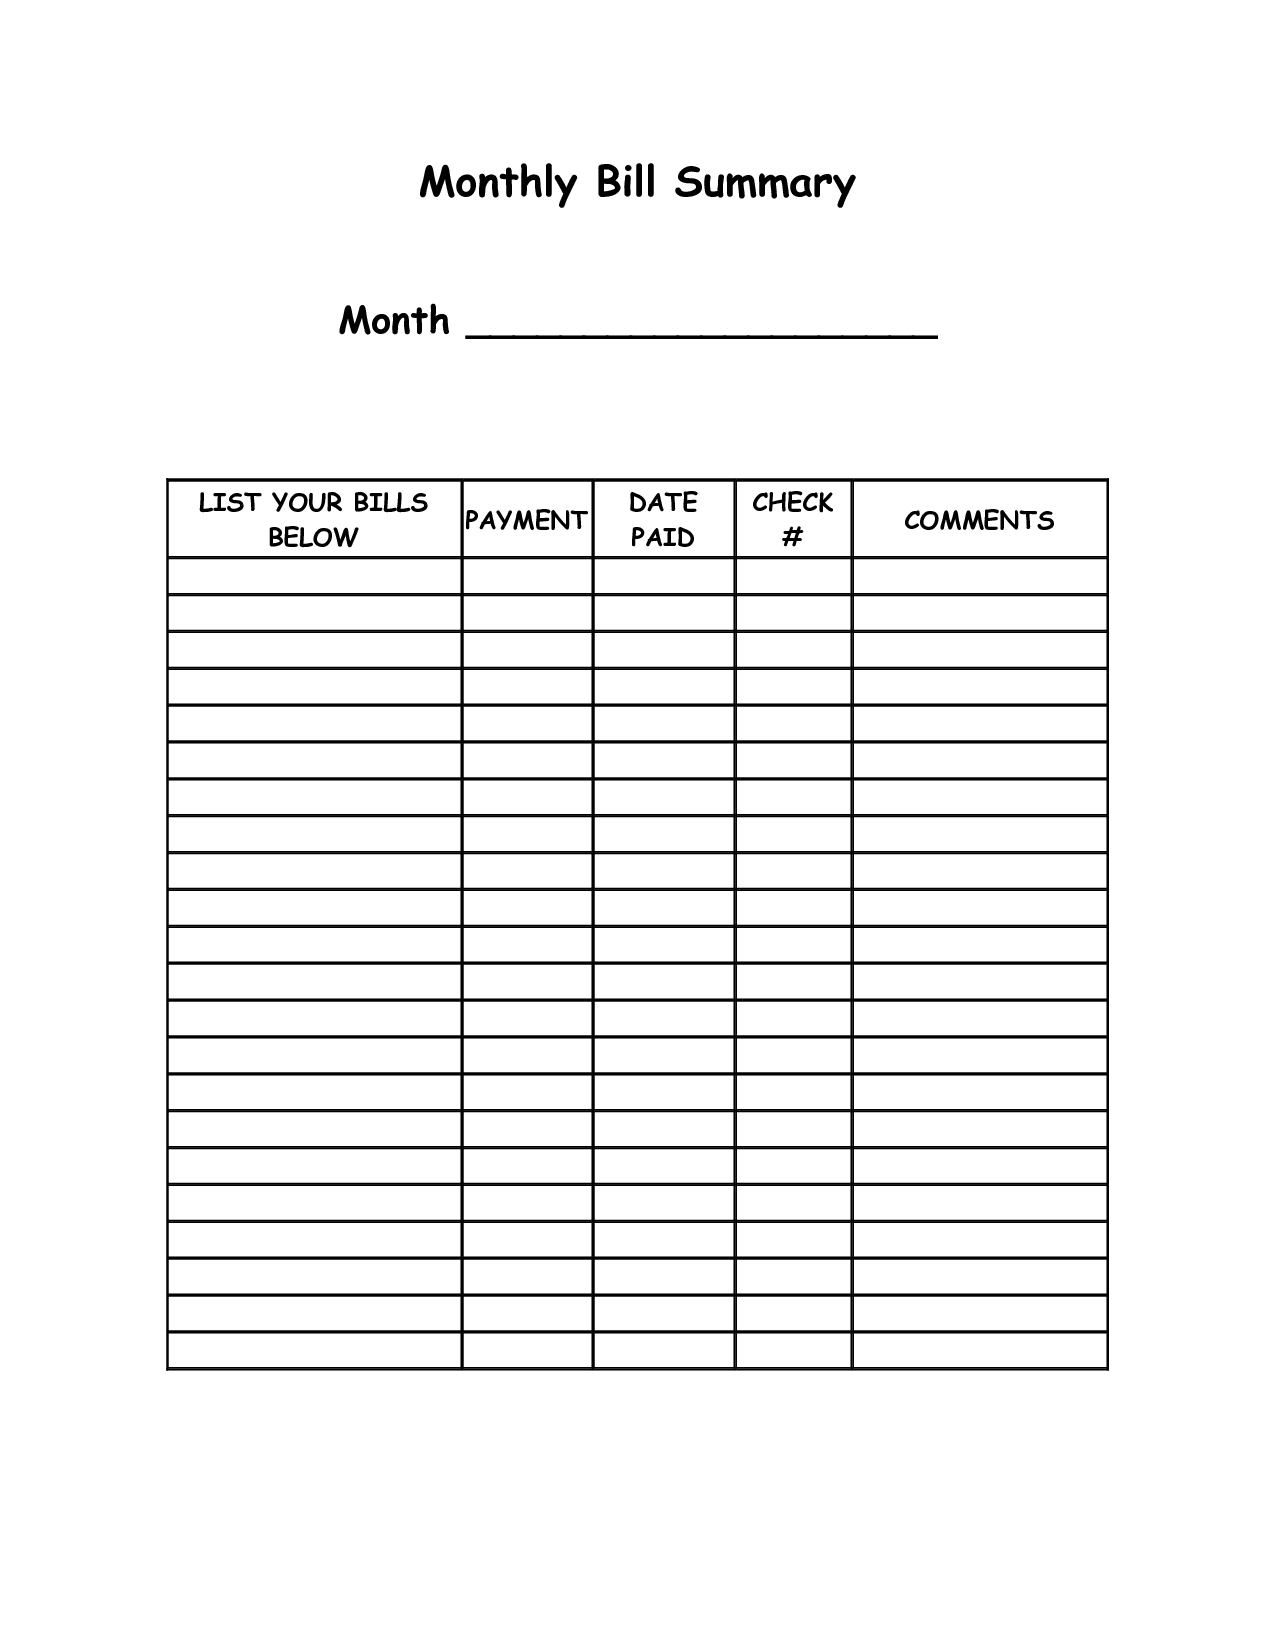 Monthly Bill Summary Doc | Monthly Bill, Organizing Monthly-Monthly Bills Due List Printable